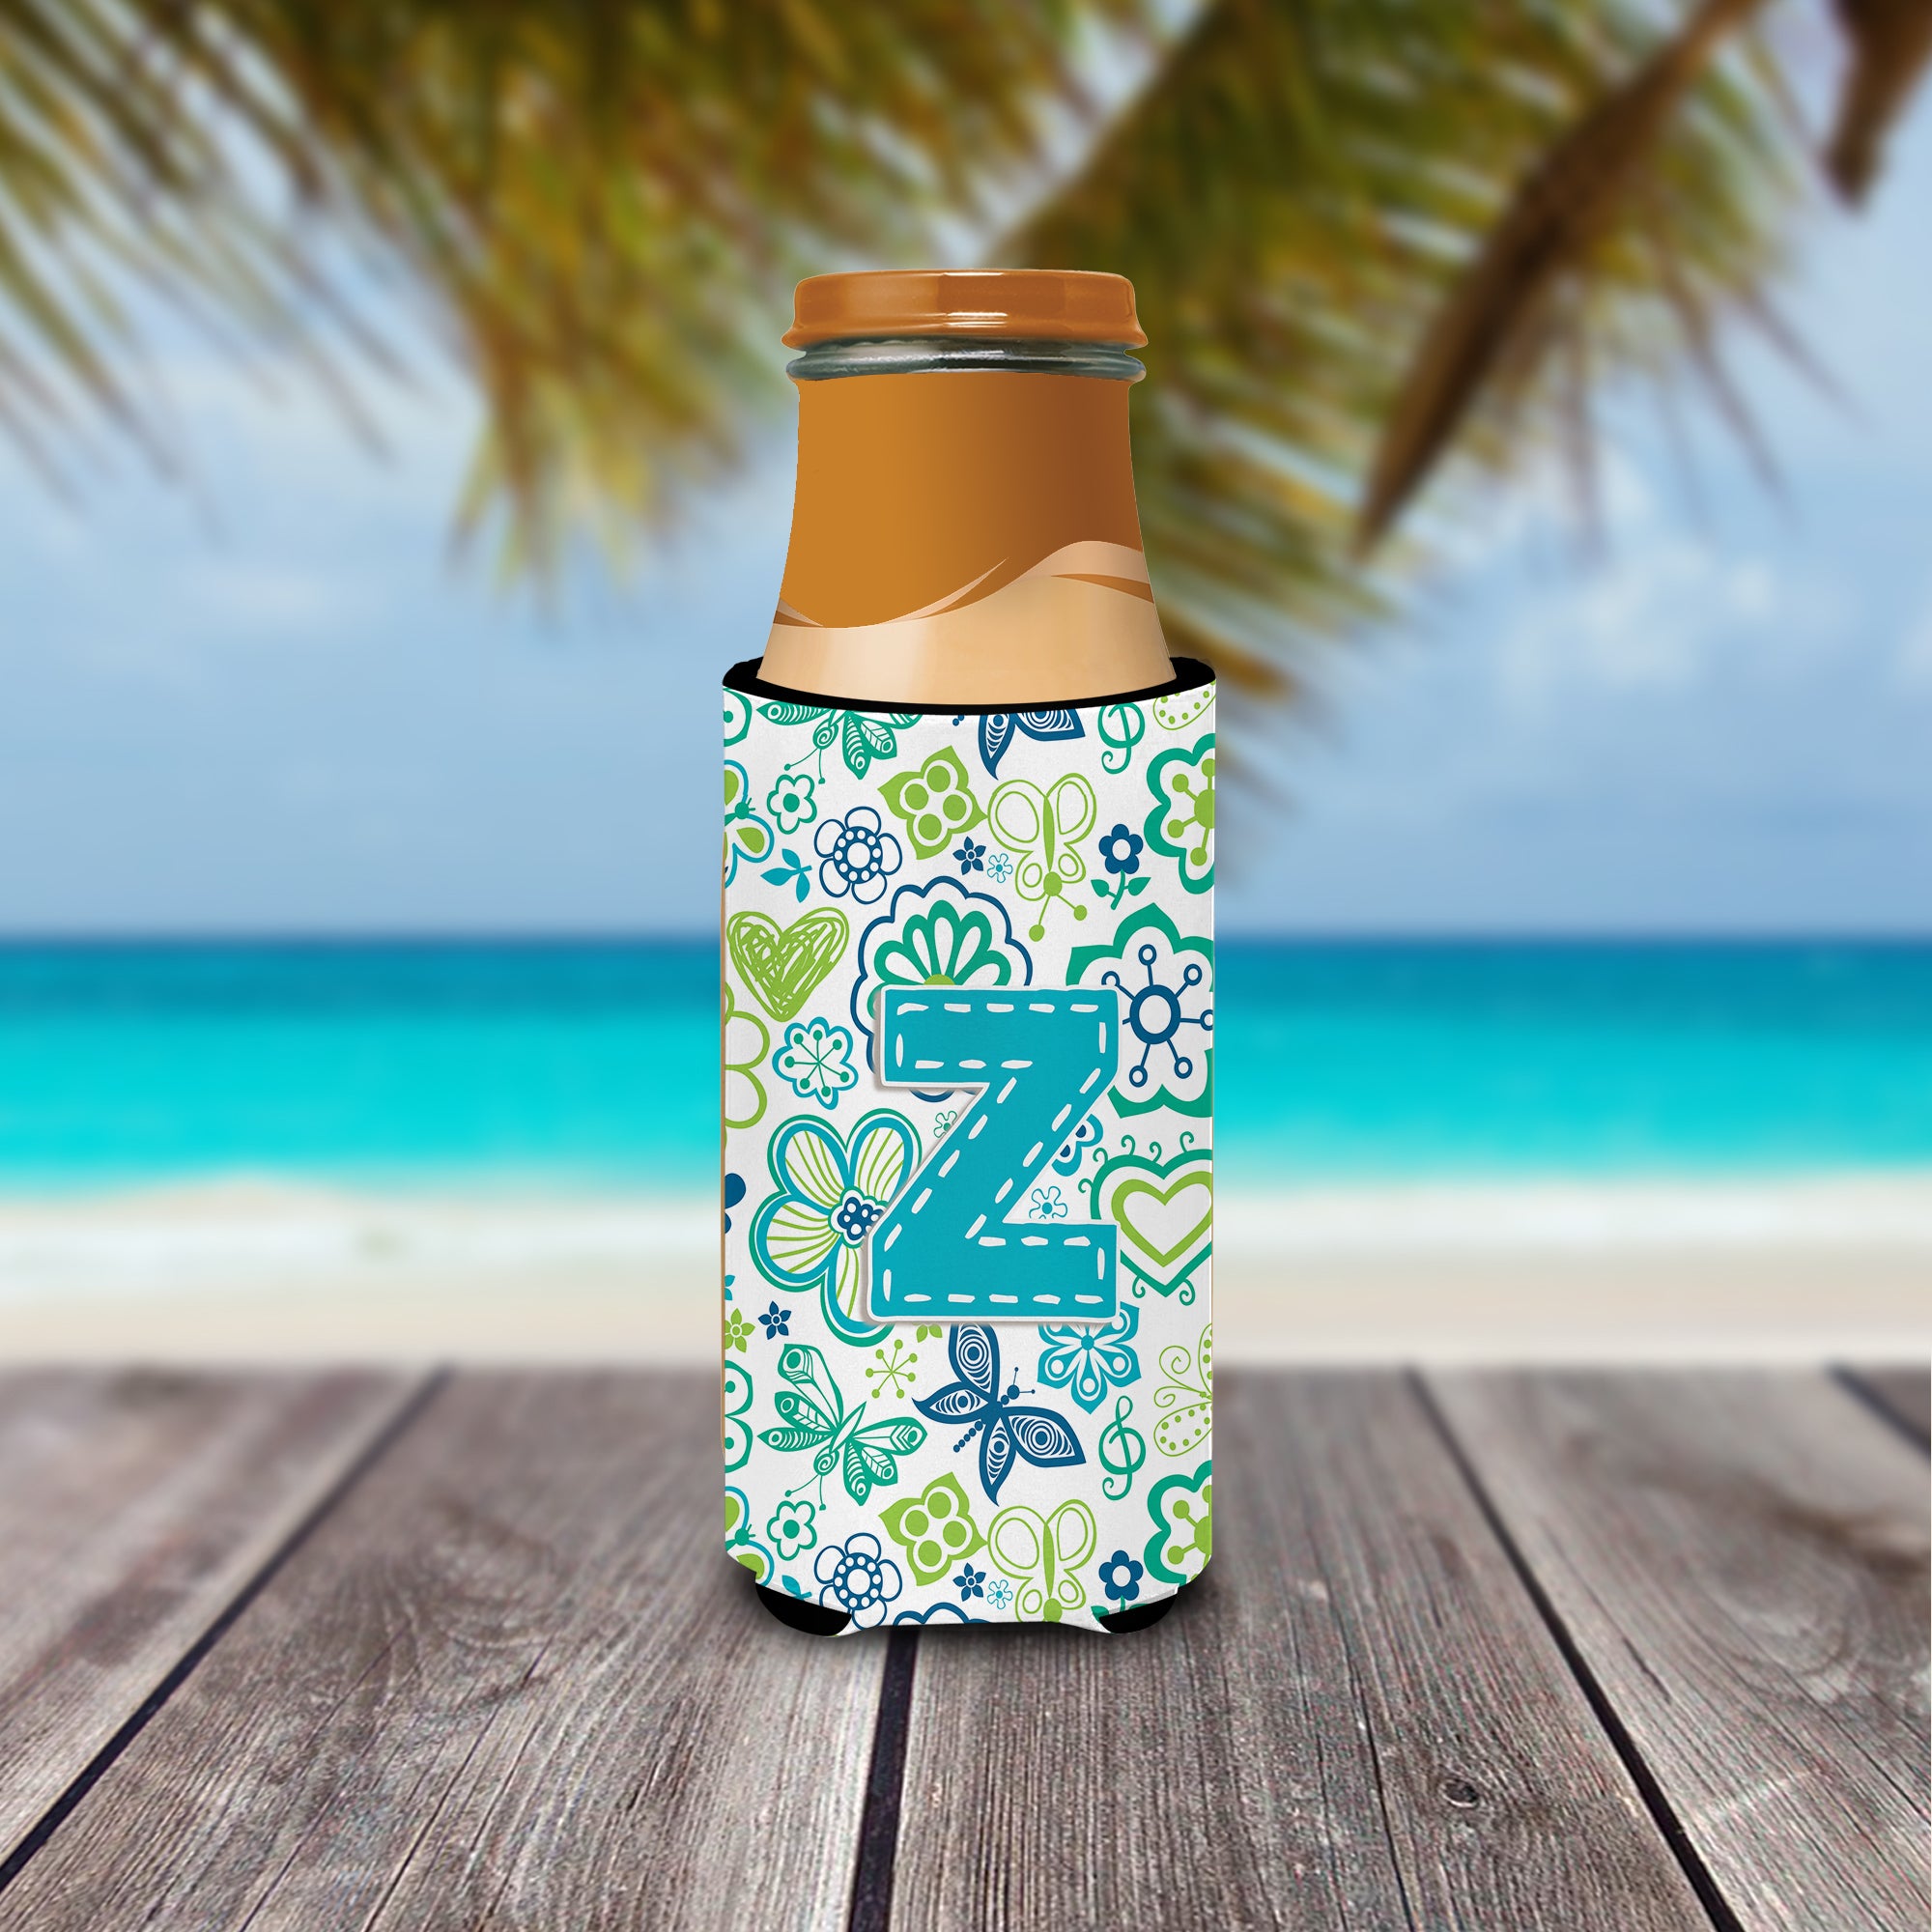 Letter Z Flowers and Butterflies Teal Blue Ultra Beverage Insulators for slim cans CJ2006-ZMUK